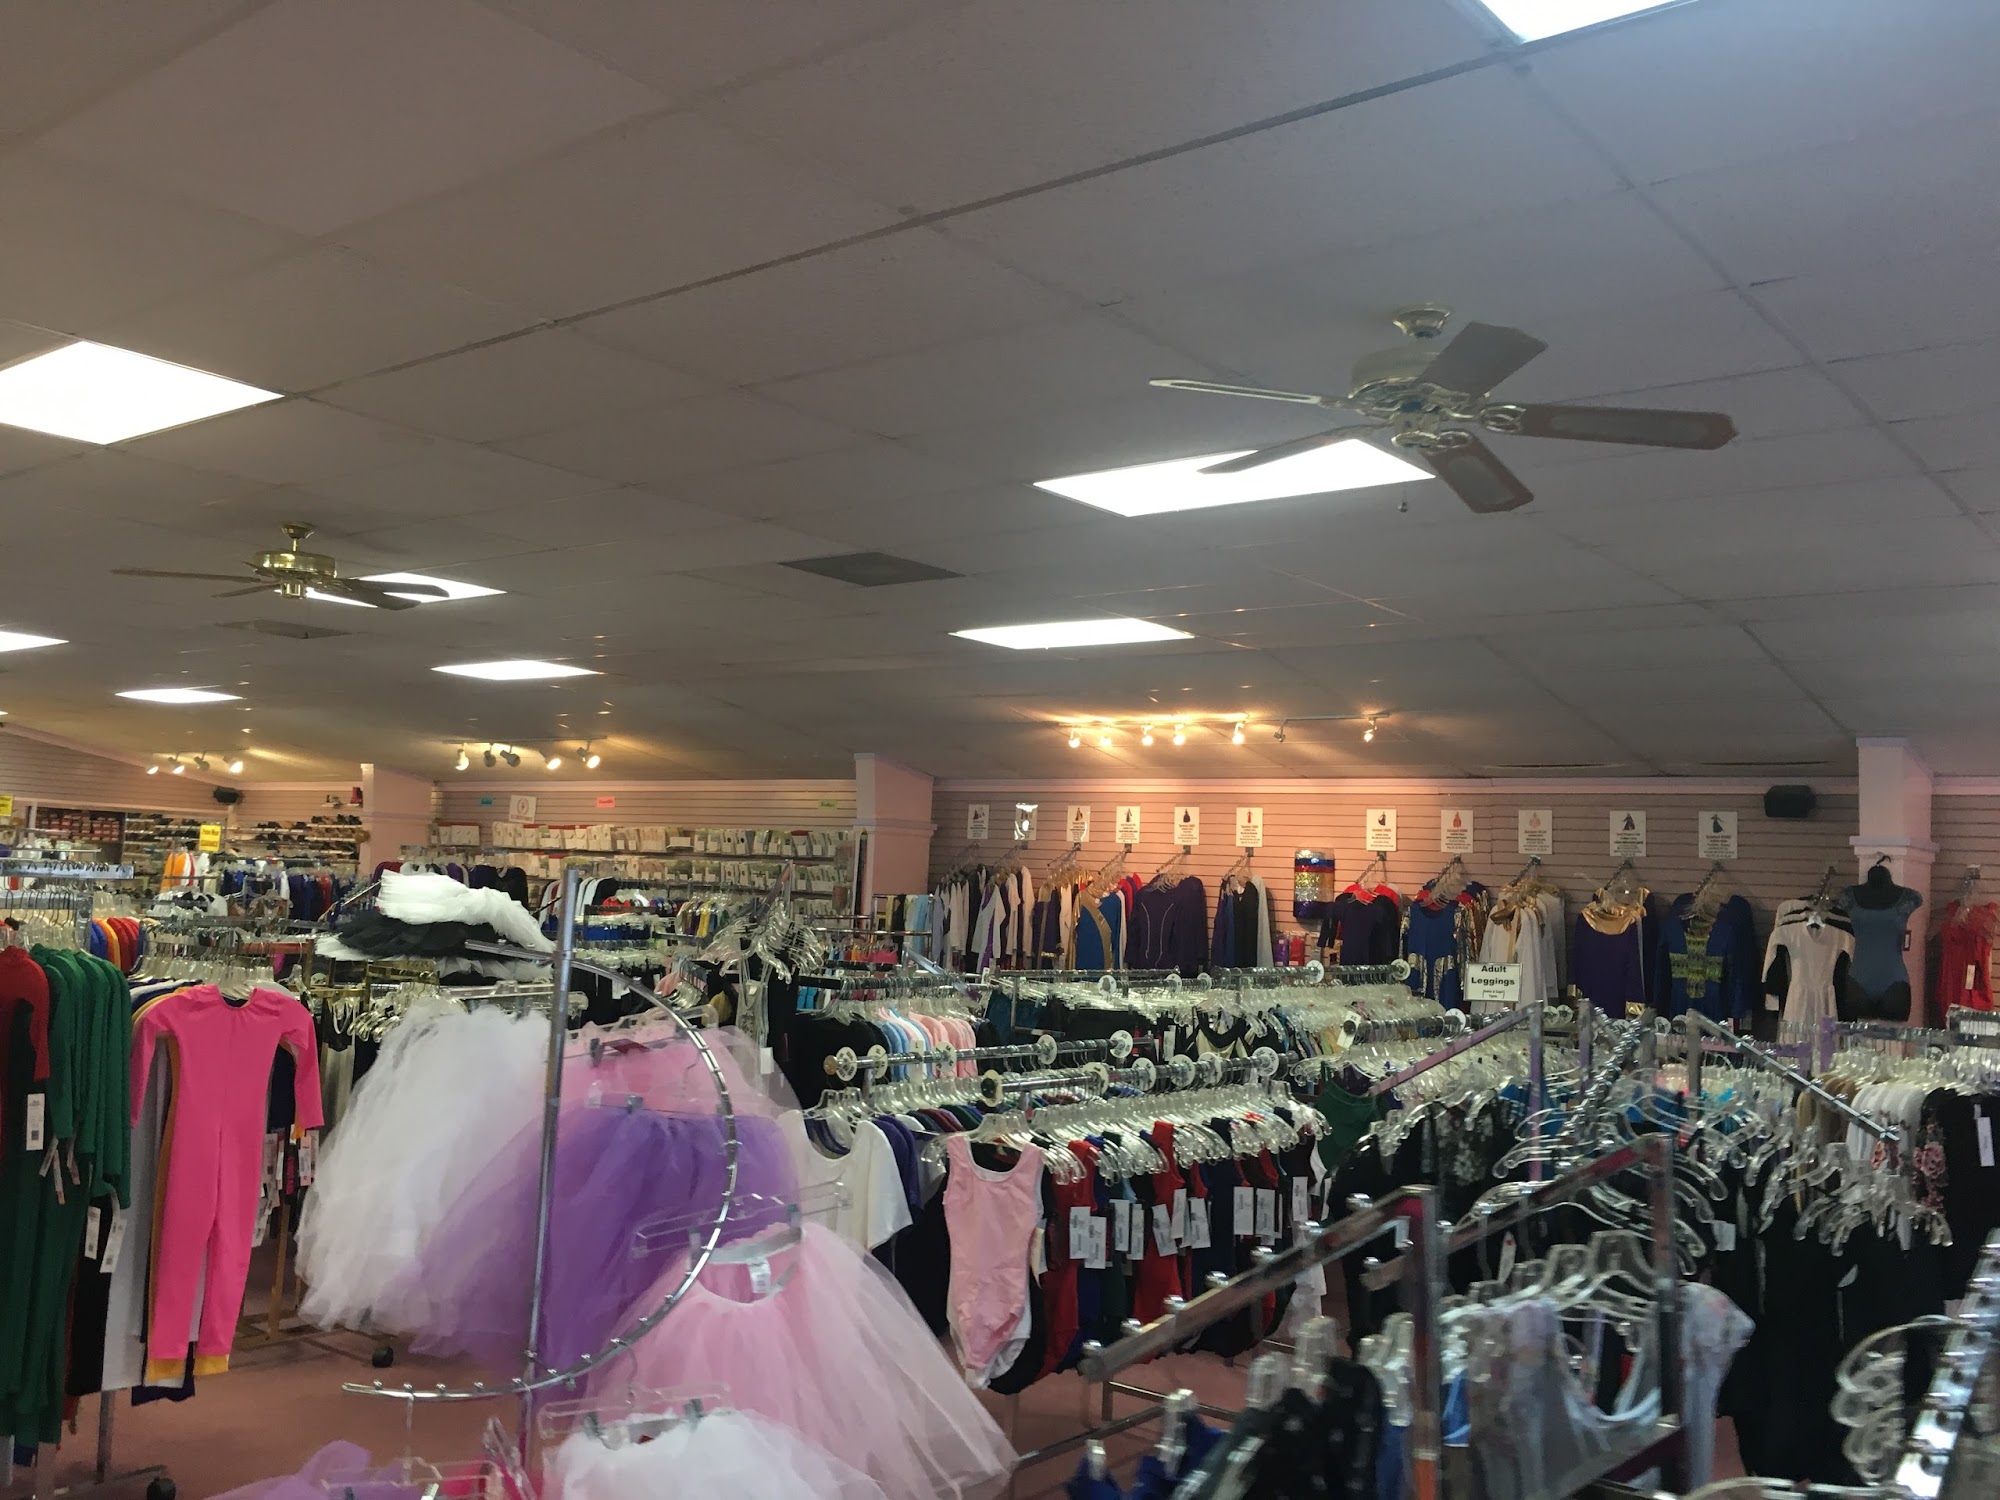 Dance Fashions Superstore